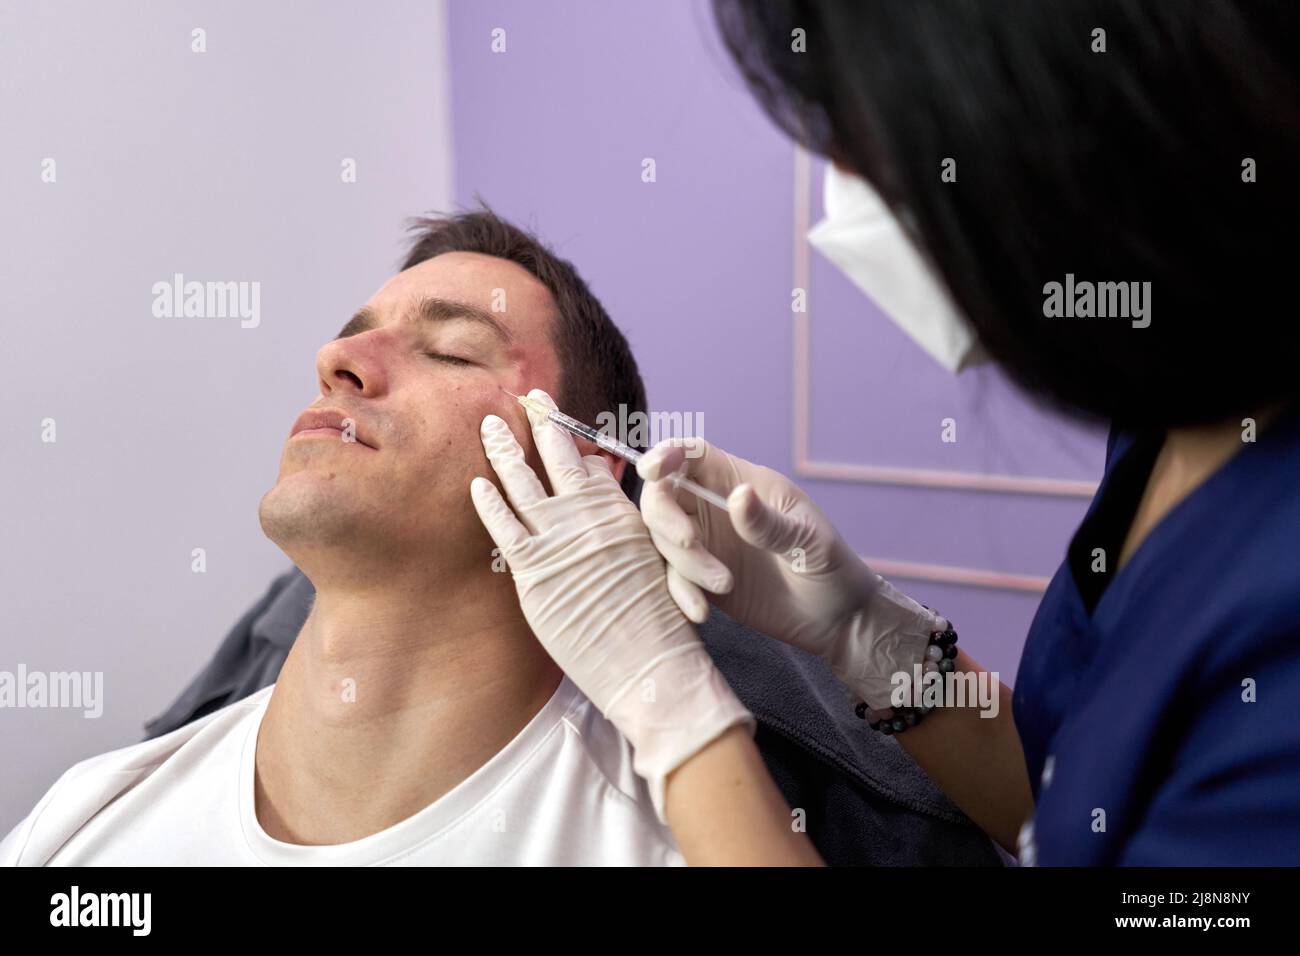 Patient closing eyes while getting a rejuvenation treatment with botox injection Stock Photo